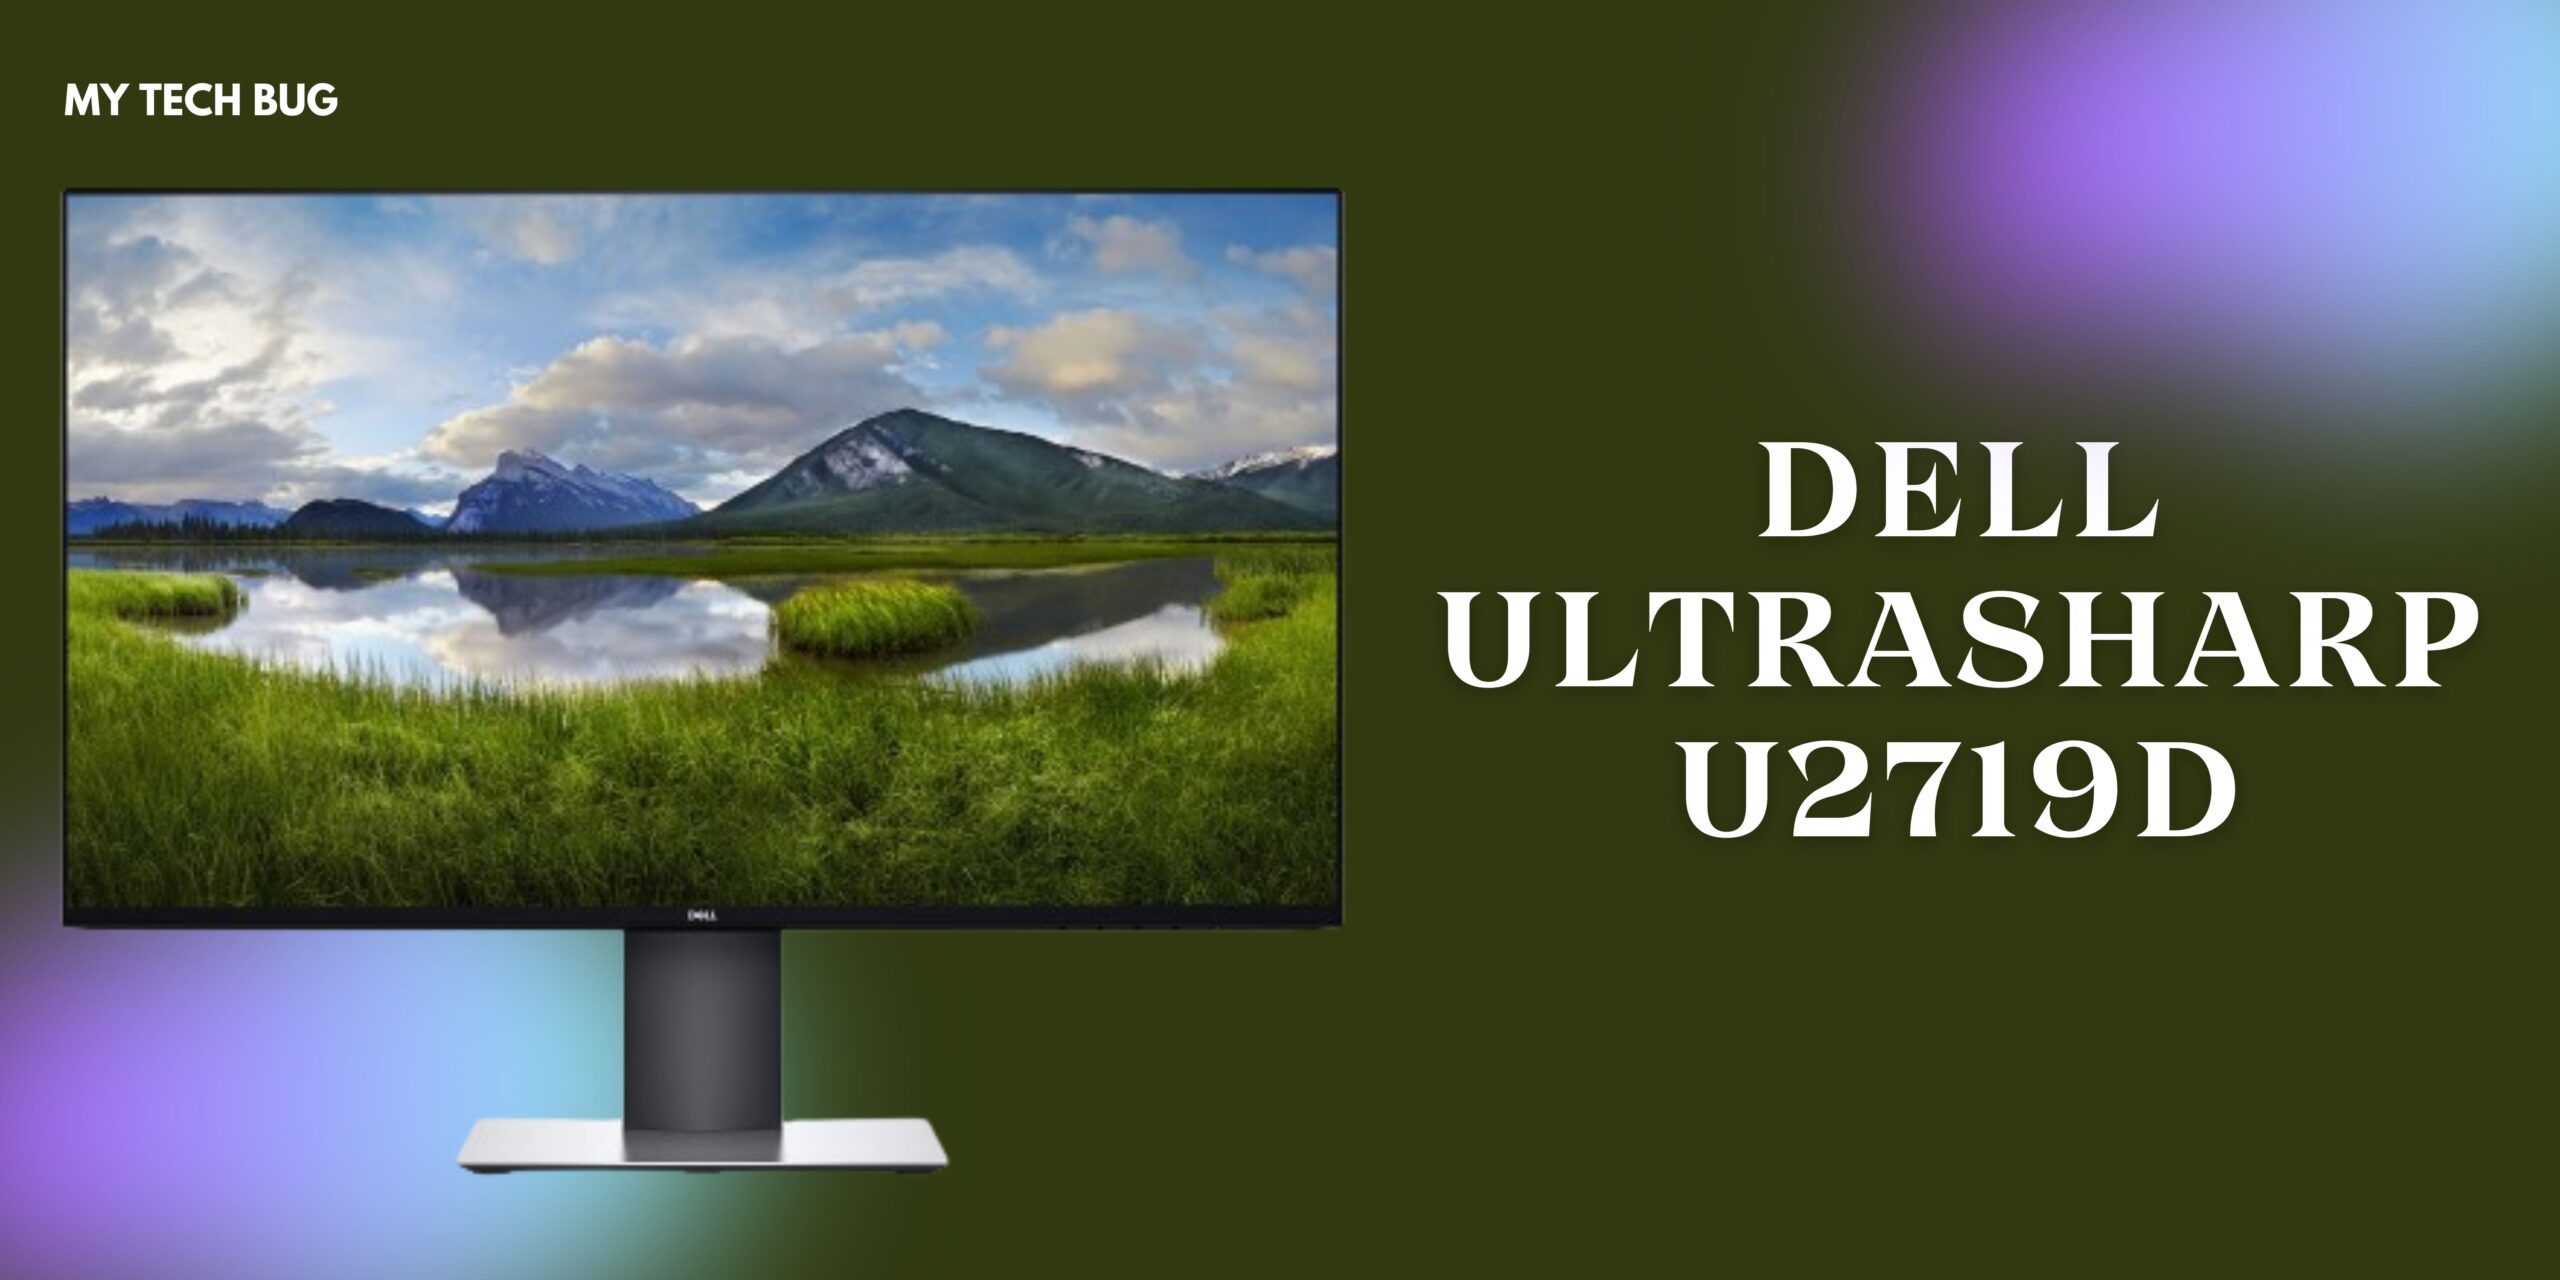 Dell UltraSharp U2719D:  A QHD Monitor for Productivity with Ergonomic Features